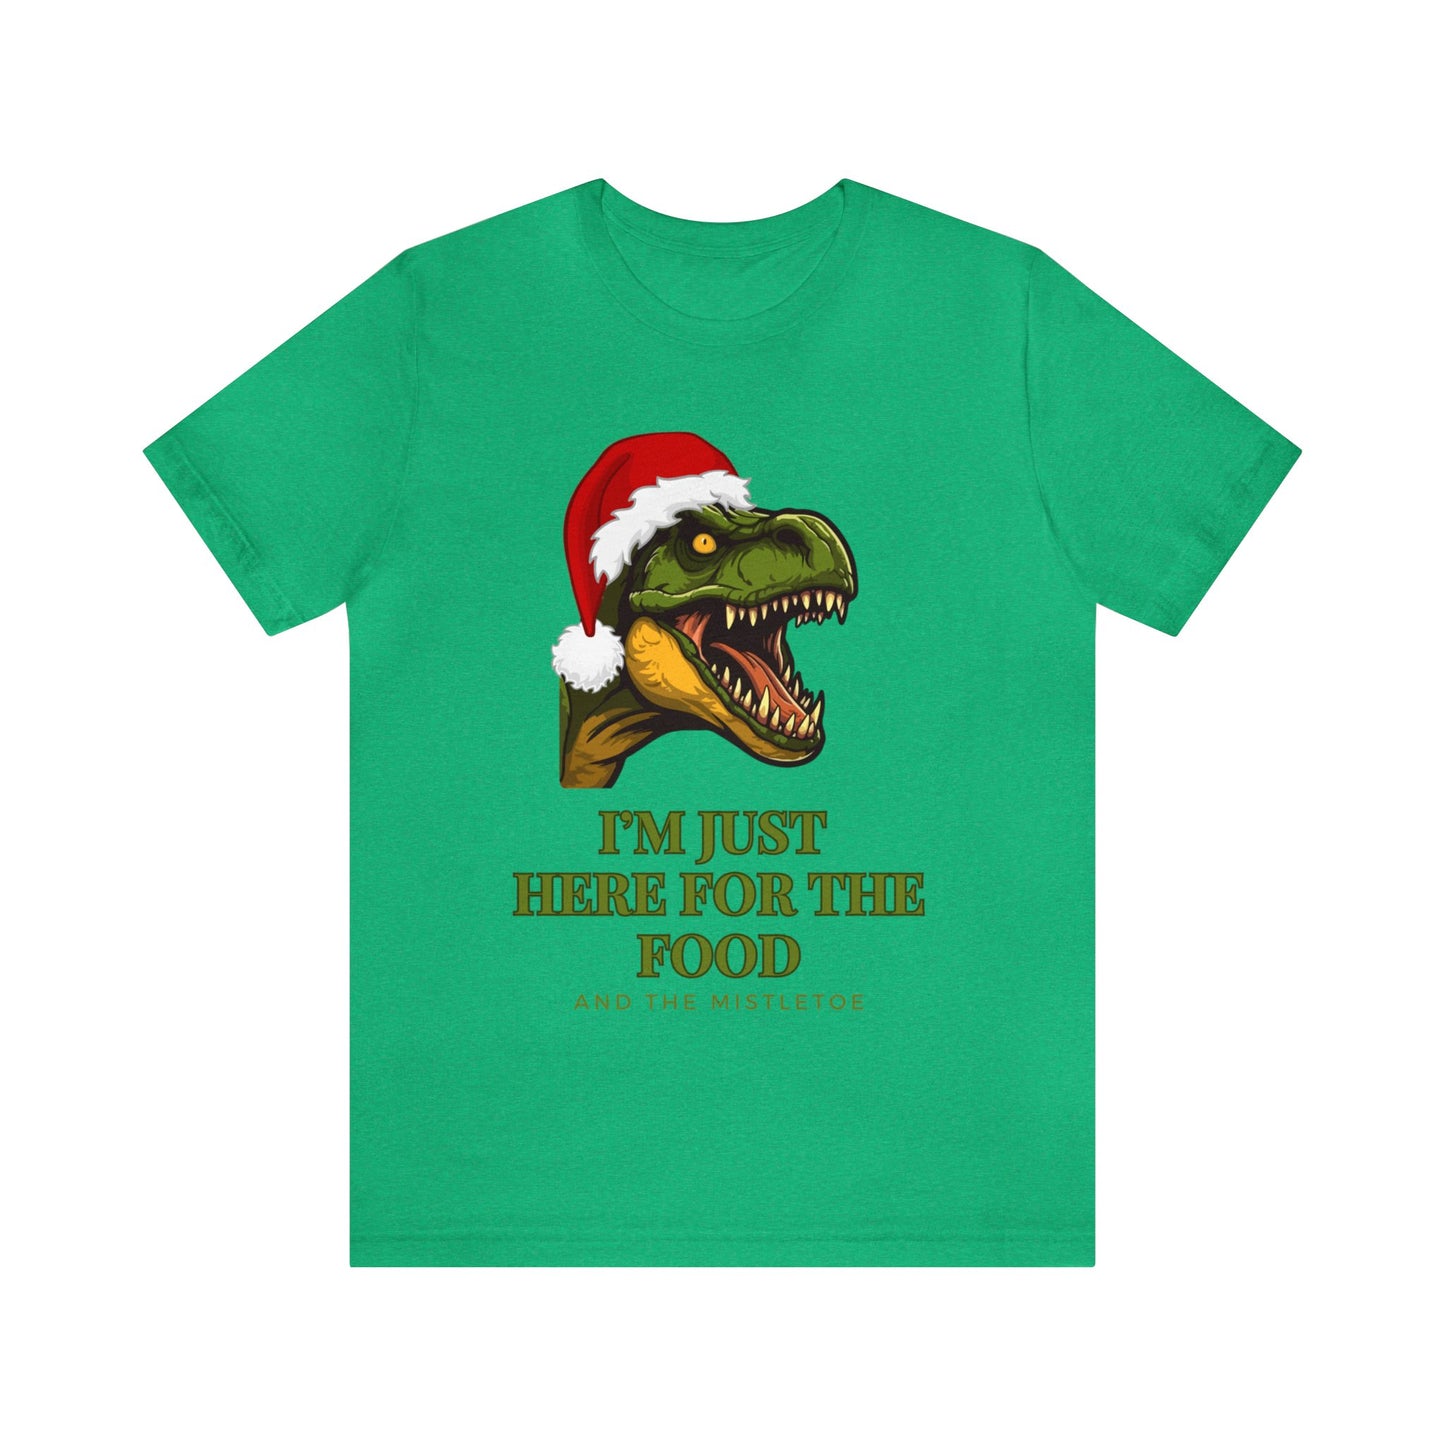 I'm Just Here For The Food And The Mistletoe Unisex Jersey Short Sleeve Tee